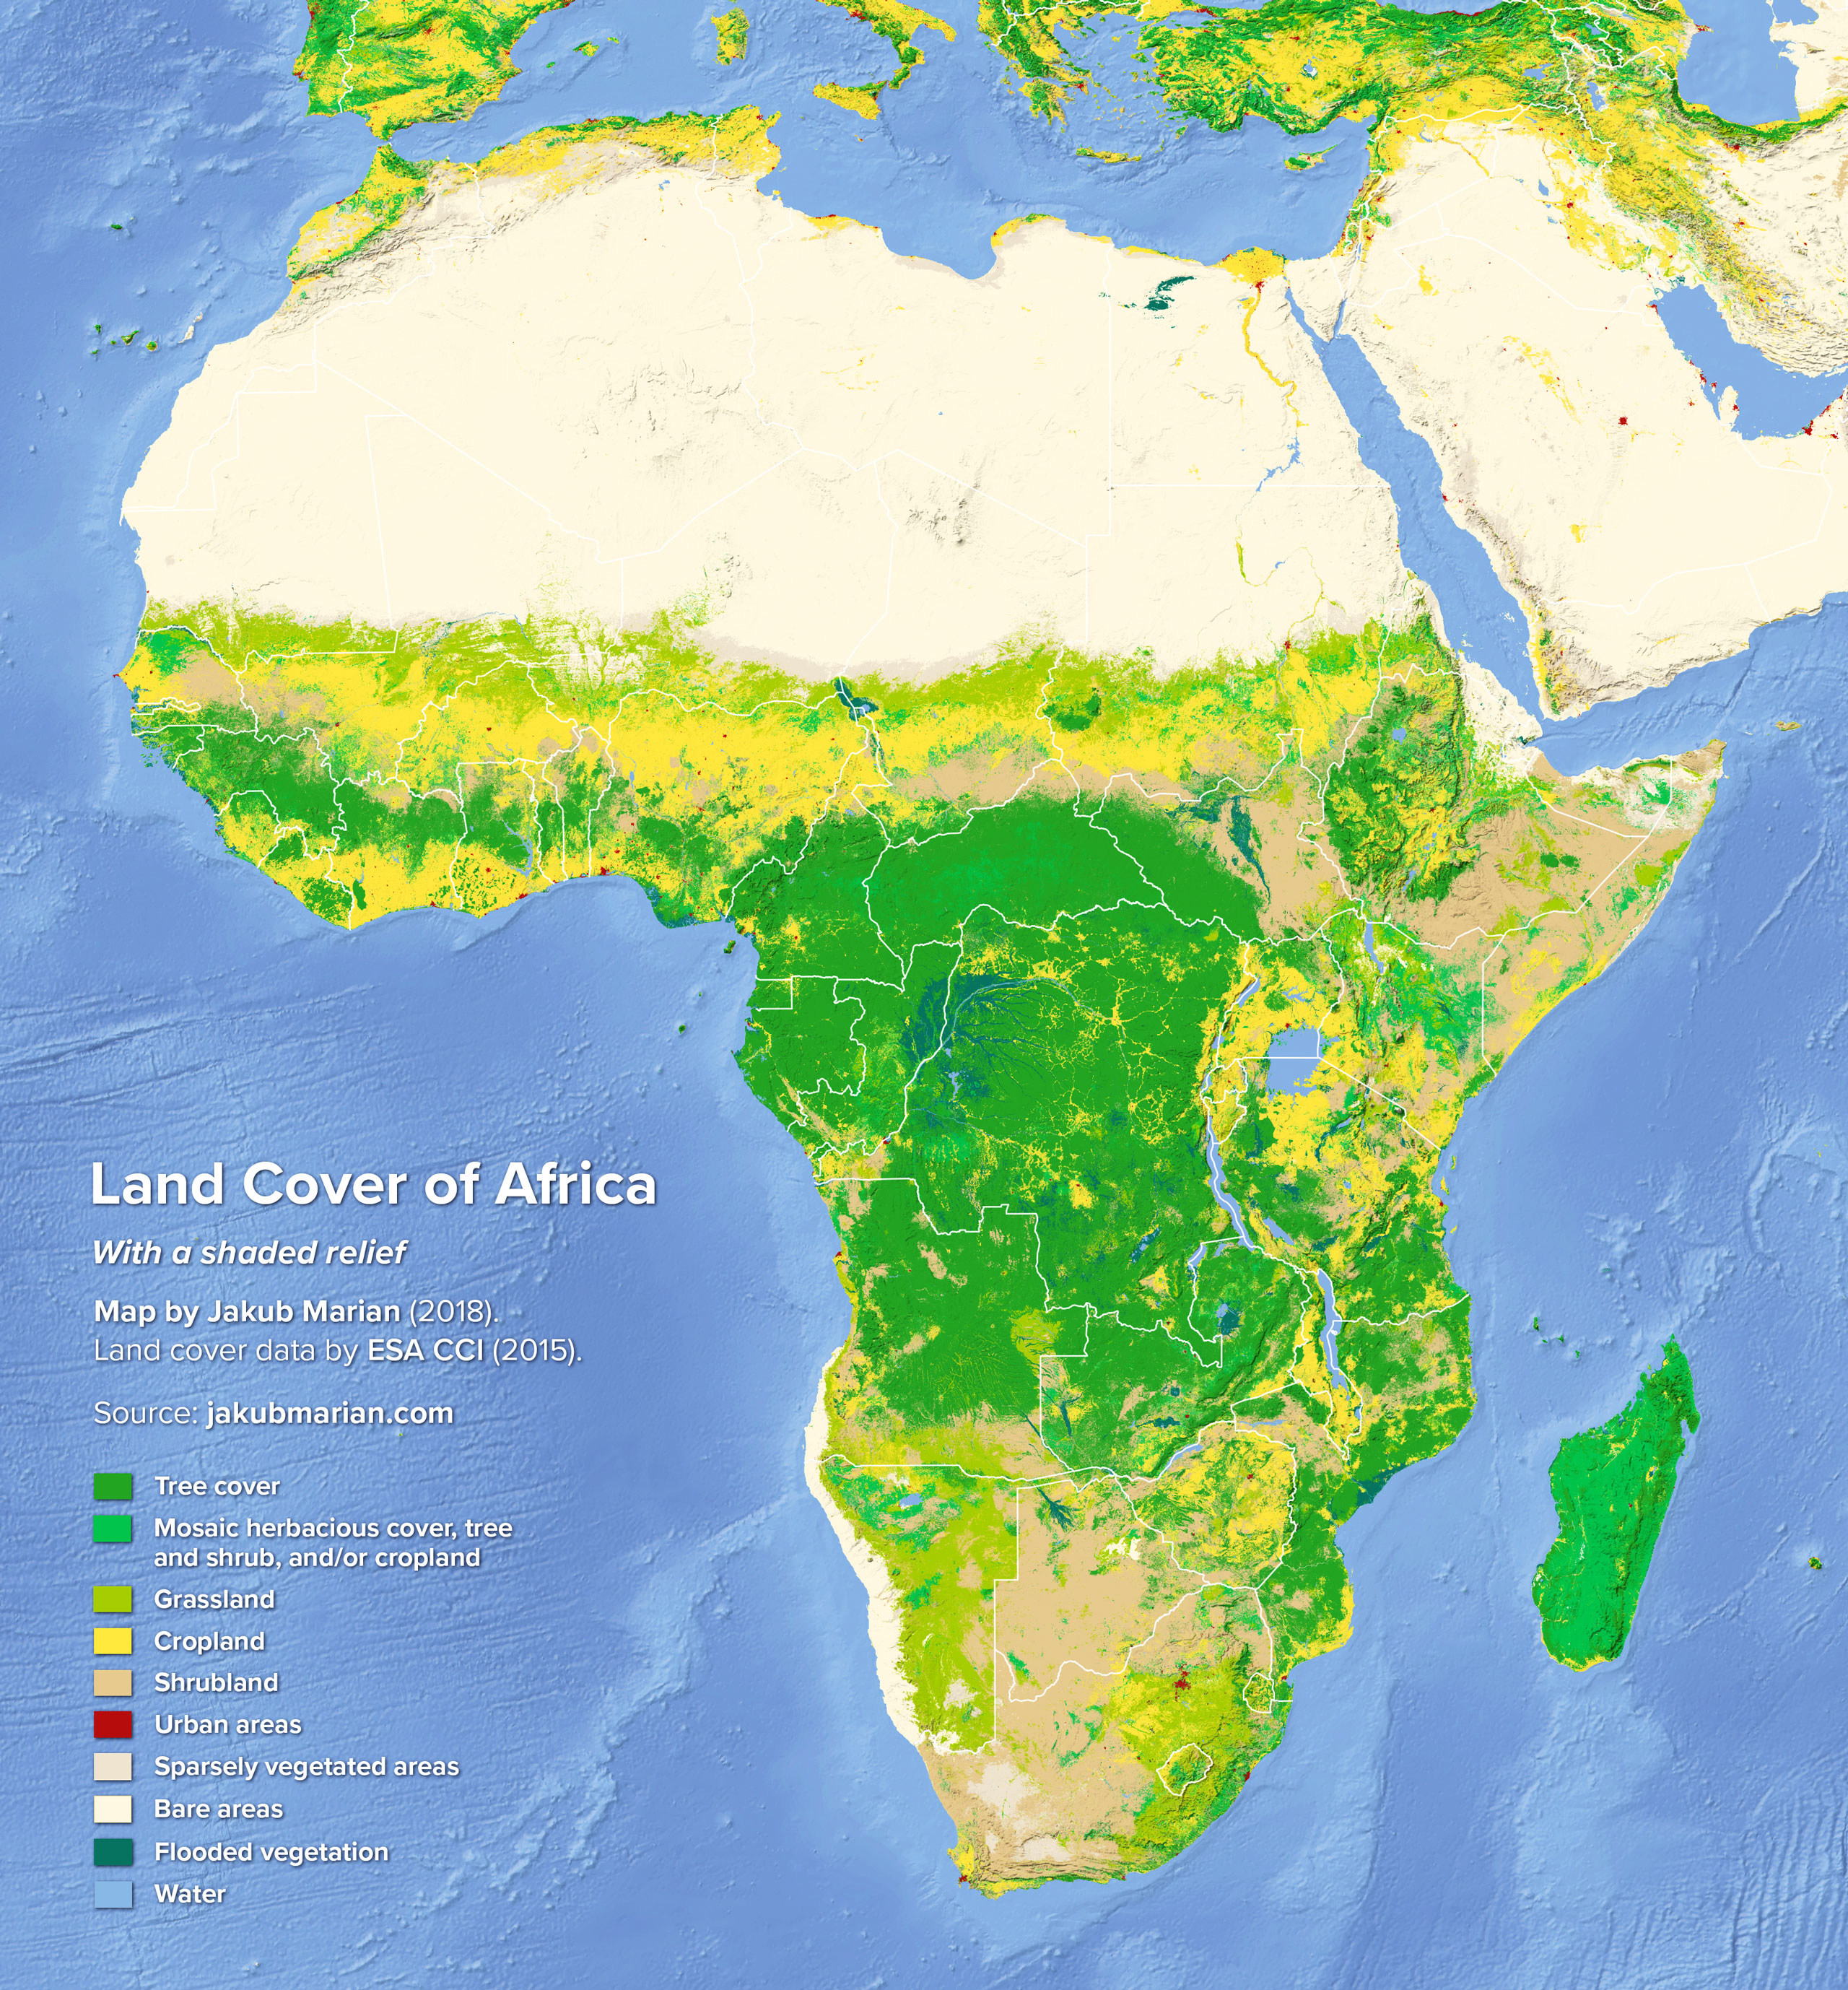 Land cover of Africa